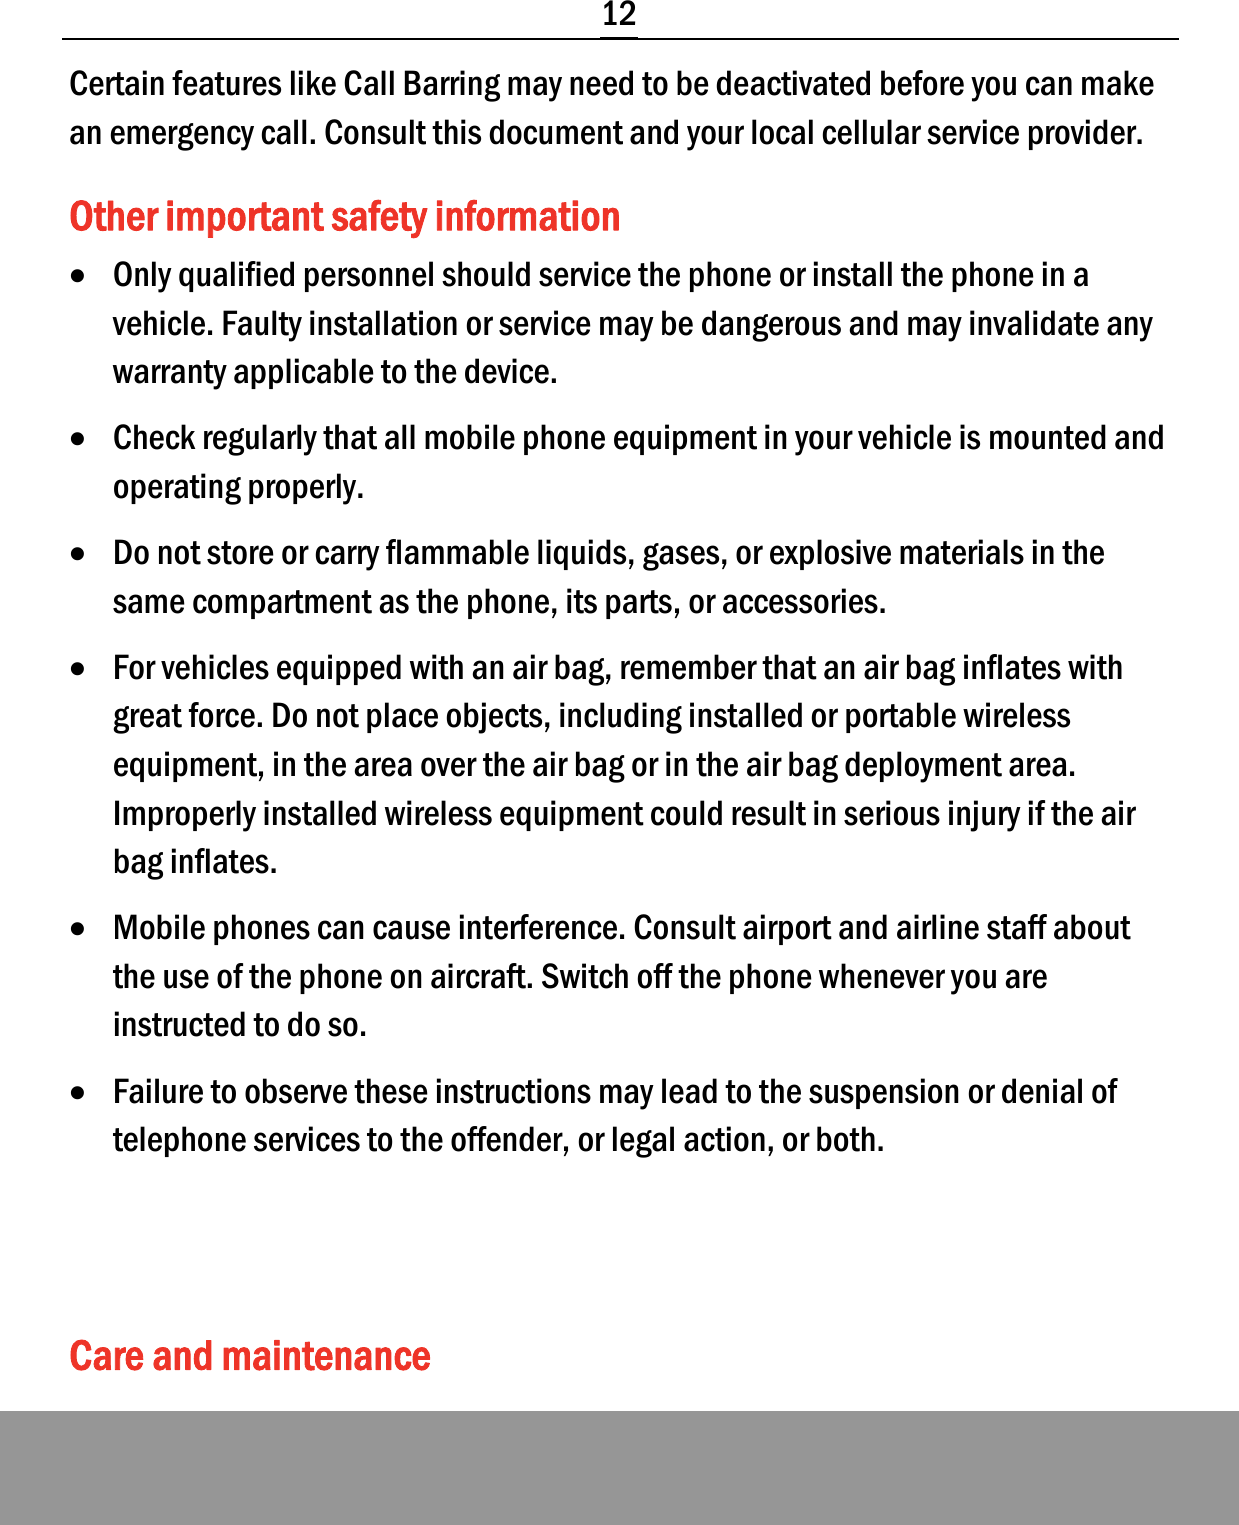  12 Certain features like Call Barring may need to be deactivated before you can make an emergency call. Consult this document and your local cellular service provider. Other important safety information • Only qualified personnel should service the phone or install the phone in a vehicle. Faulty installation or service may be dangerous and may invalidate any warranty applicable to the device. • Check regularly that all mobile phone equipment in your vehicle is mounted and operating properly. • Do not store or carry flammable liquids, gases, or explosive materials in the same compartment as the phone, its parts, or accessories. • For vehicles equipped with an air bag, remember that an air bag inflates with great force. Do not place objects, including installed or portable wireless equipment, in the area over the air bag or in the air bag deployment area. Improperly installed wireless equipment could result in serious injury if the air bag inflates. • Mobile phones can cause interference. Consult airport and airline staff about the use of the phone on aircraft. Switch off the phone whenever you are instructed to do so. • Failure to observe these instructions may lead to the suspension or denial of telephone services to the offender, or legal action, or both.   Care and maintenance 